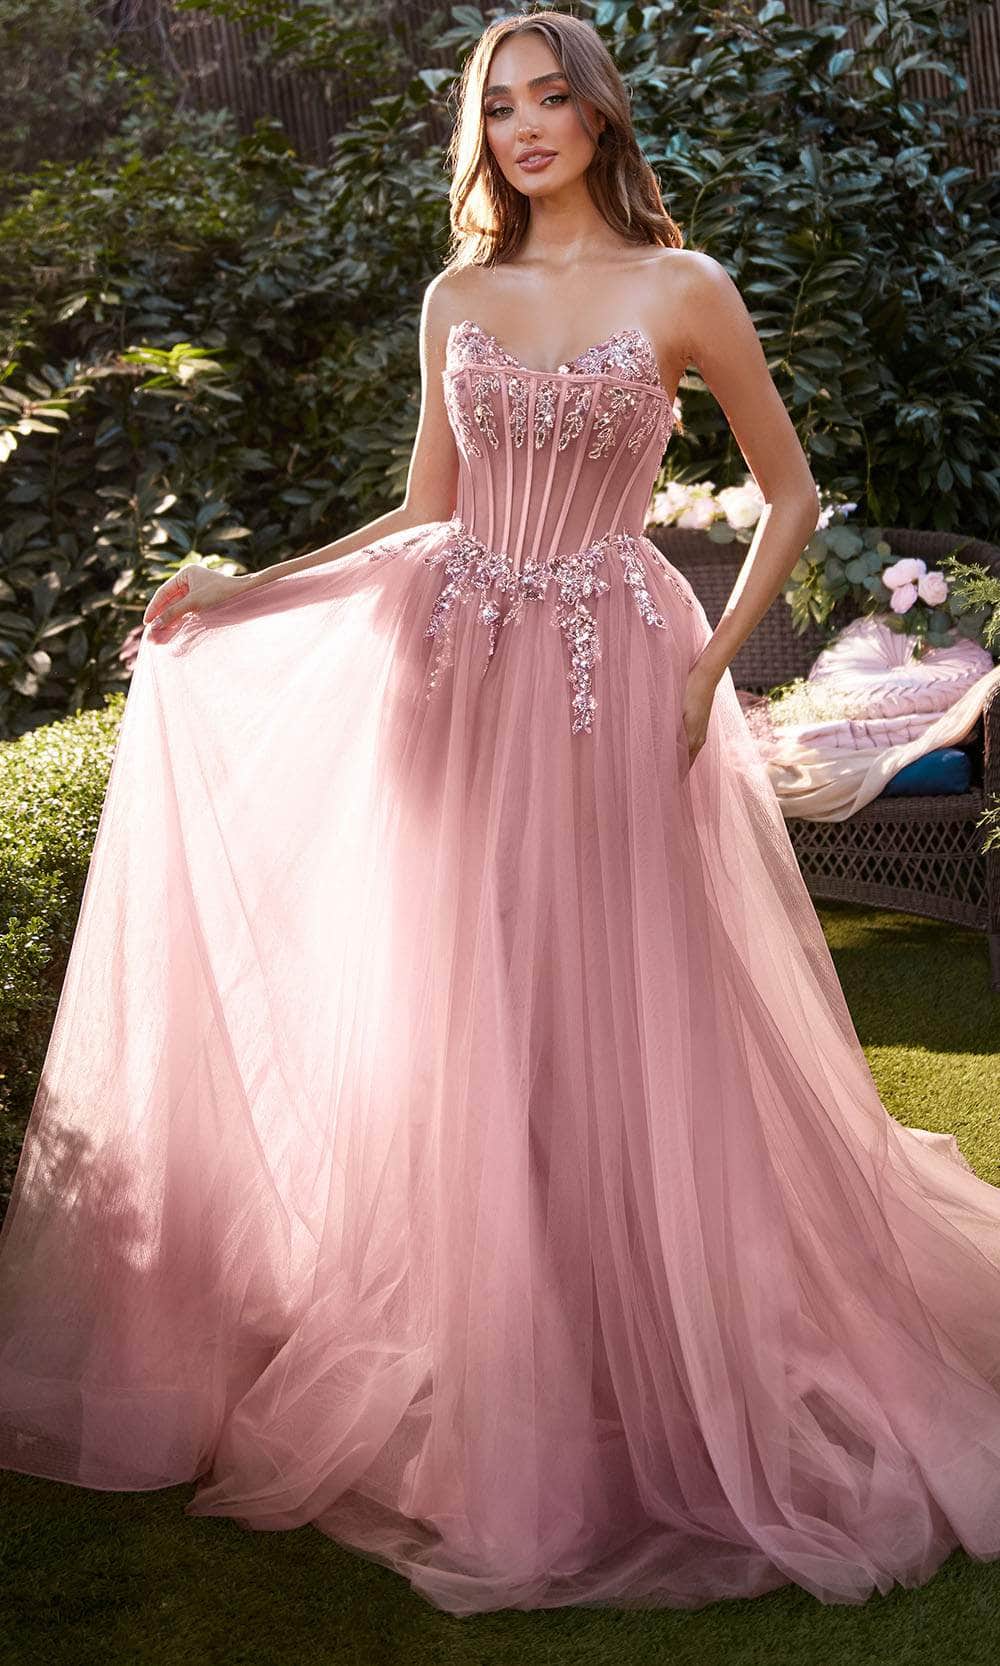 Andrea And Leo A1267 - Beaded Appliqued Evening Dress 2 / Rose